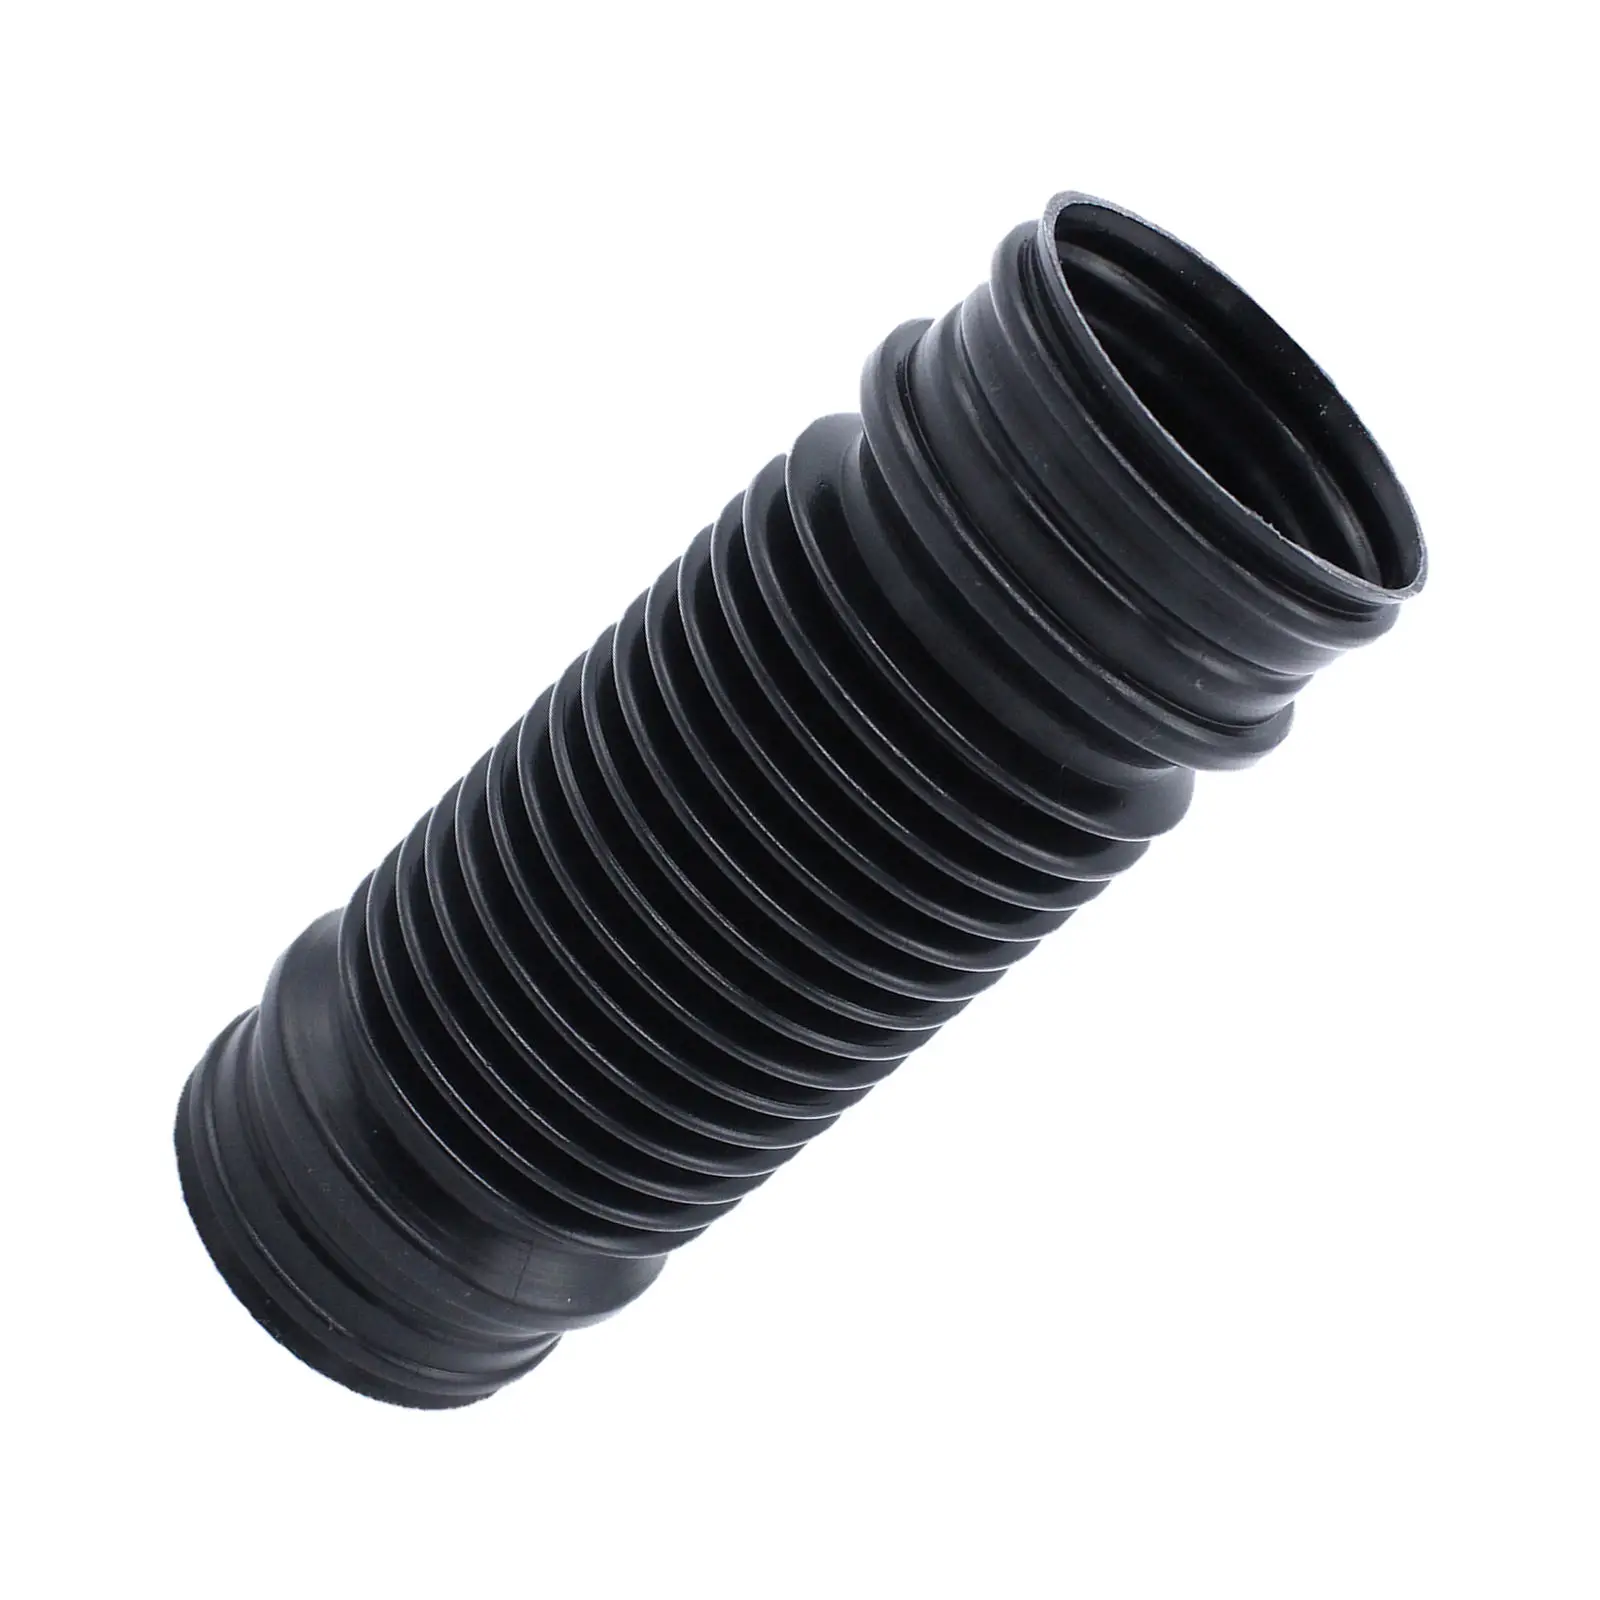 Intake Control Air Hose Pipe 1J0129618B Fit for VW Bora 99-05 Air Intake Tube Cleaner Hose Replacement Parts Acc